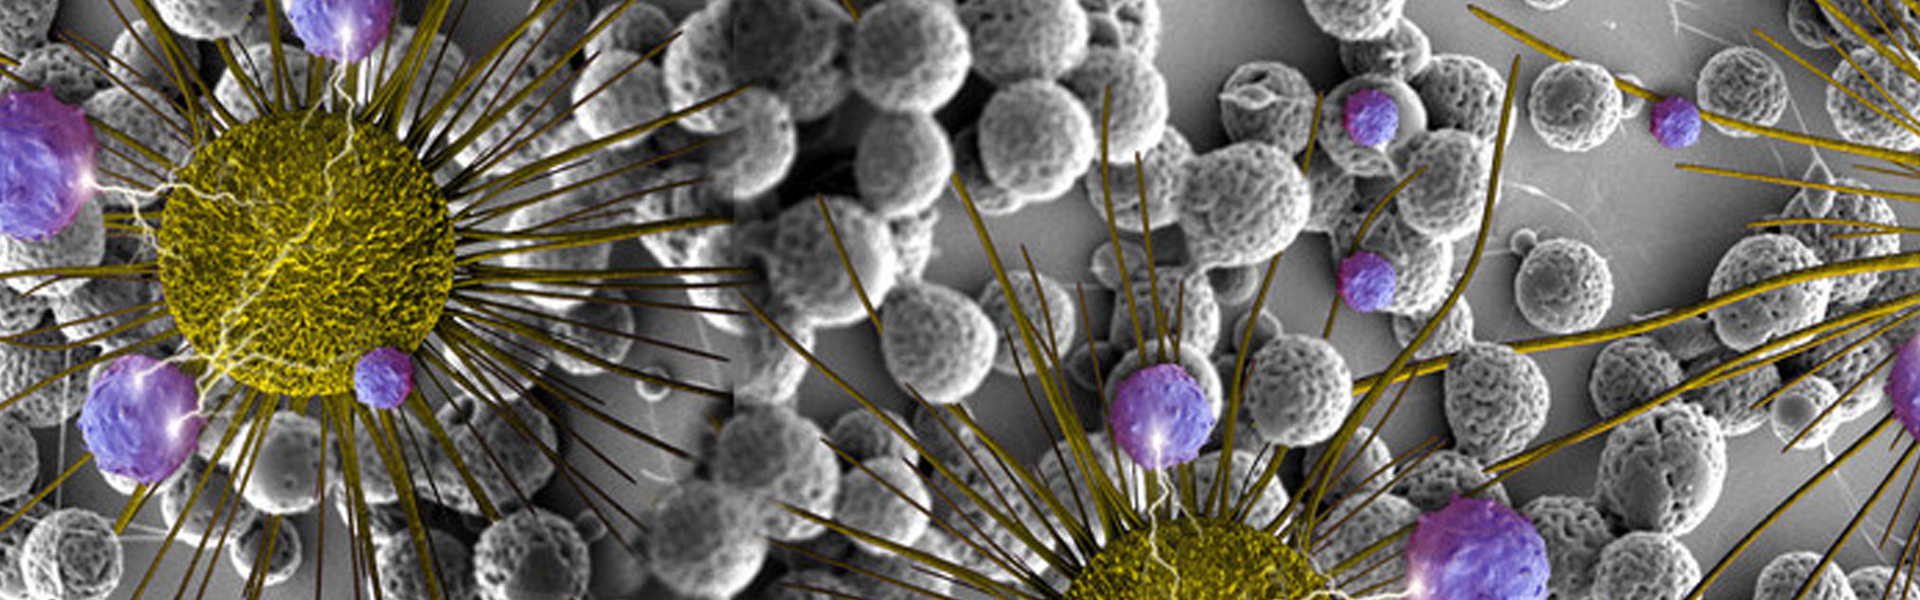 Scanning electron micrograph of BCNU-loaded microspheres (black and white background) with 3d rendered images of brain cancers c